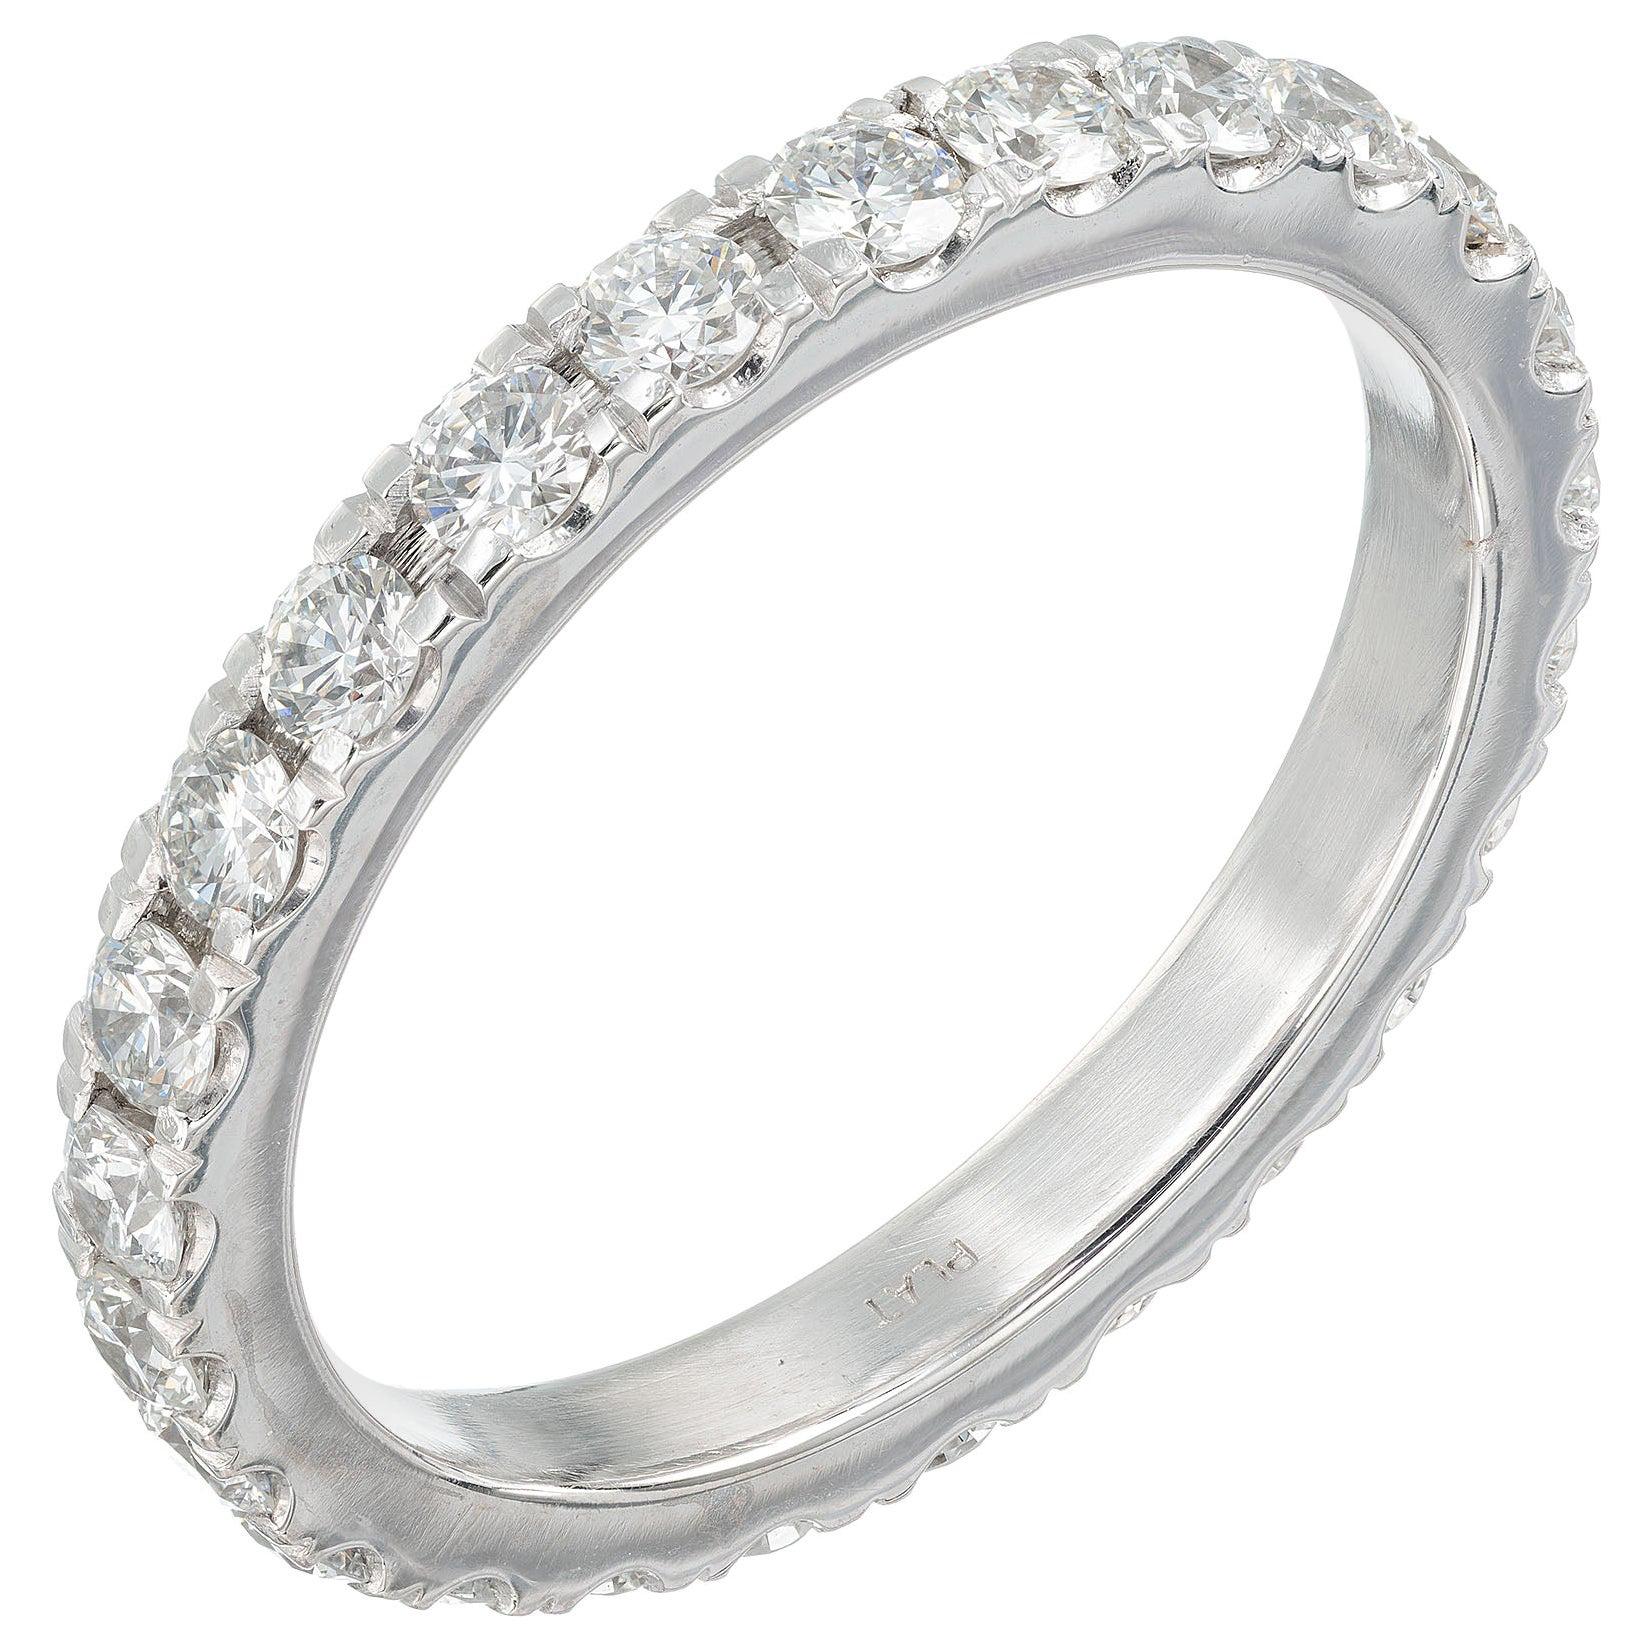 Peter Suchy 1.13 Carat Diamond Platinum Eternity Band Ring For Sale